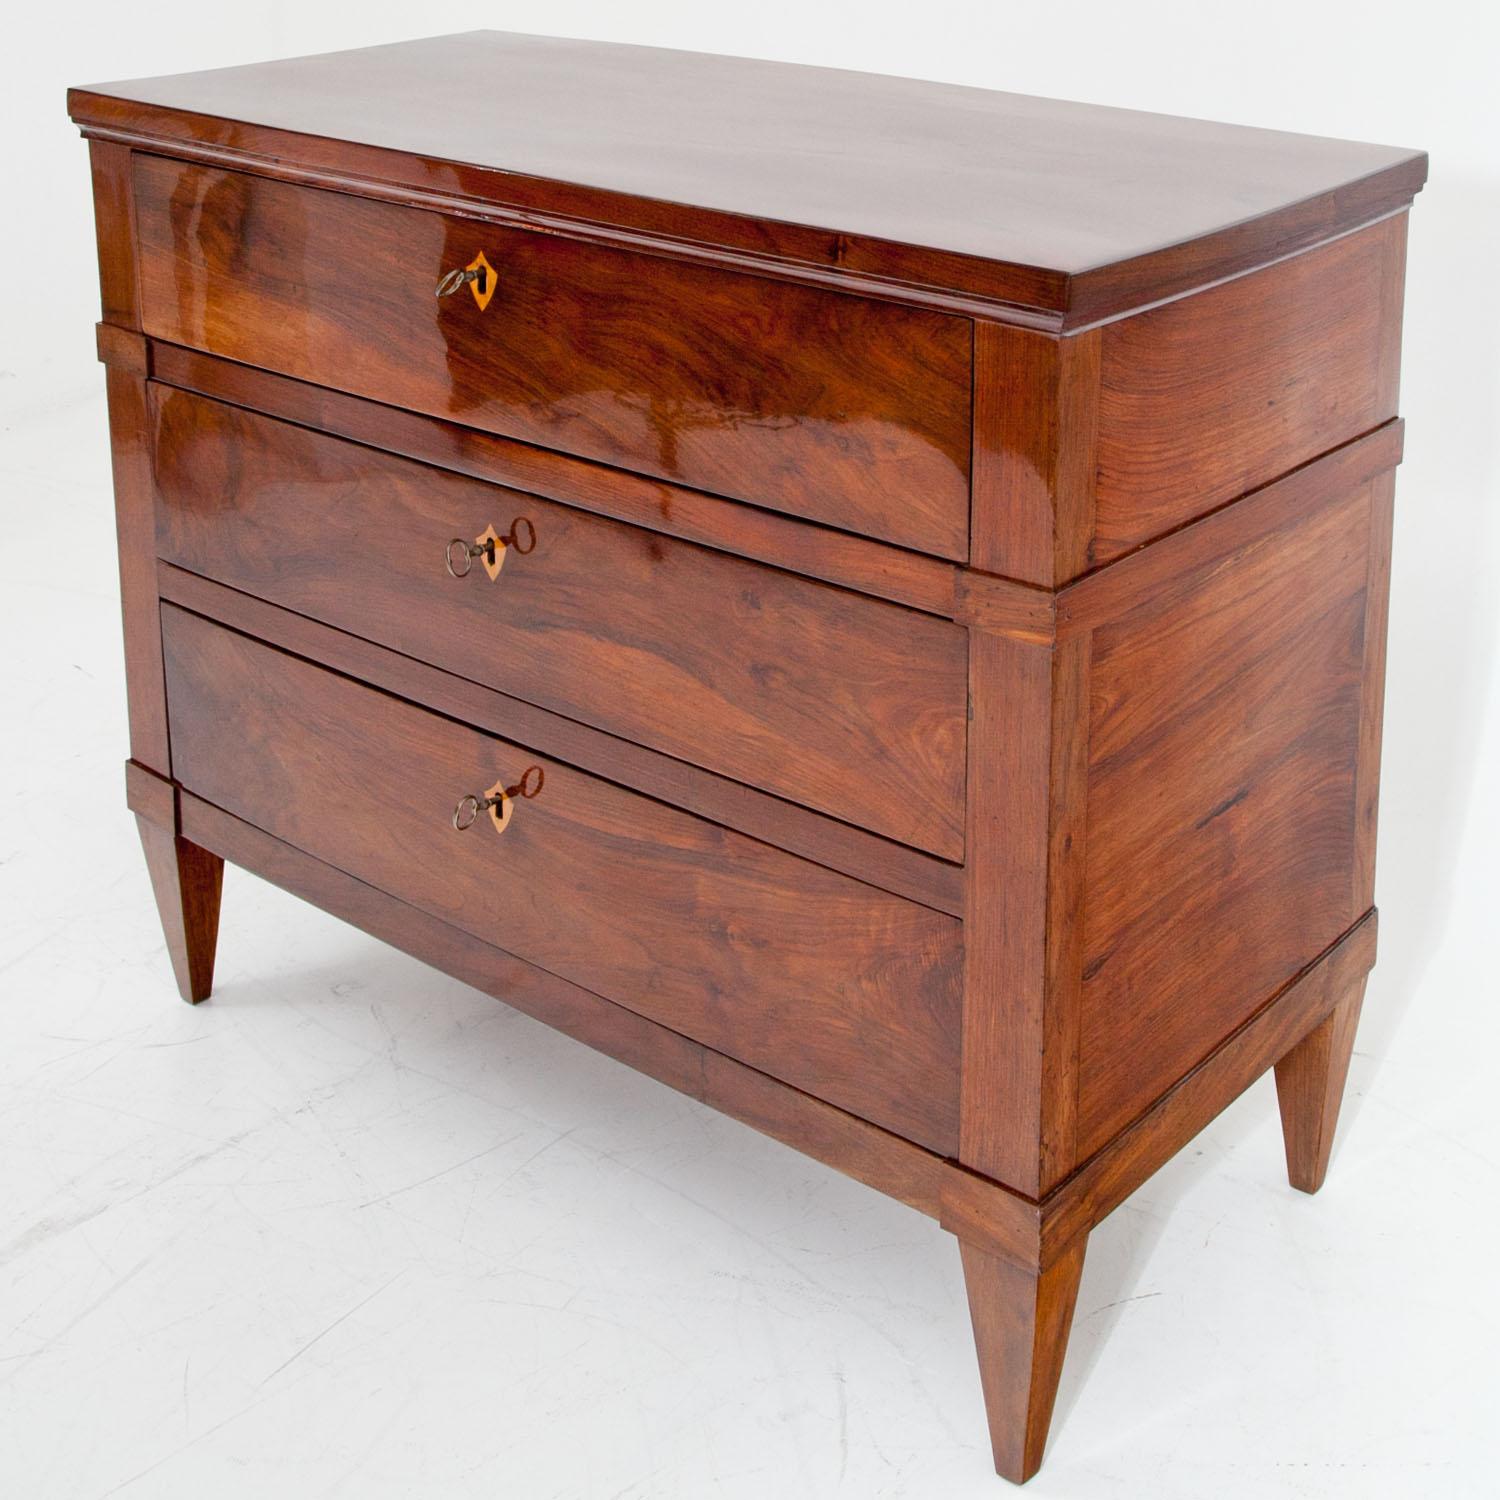 Chest of drawers, standing on tapered legs, with three drawers and escutcheons in maple. The top drawer and the feet are slightly accentuated by rectangles. Walnut veneered. Very beautiful professionally refurbished condition.